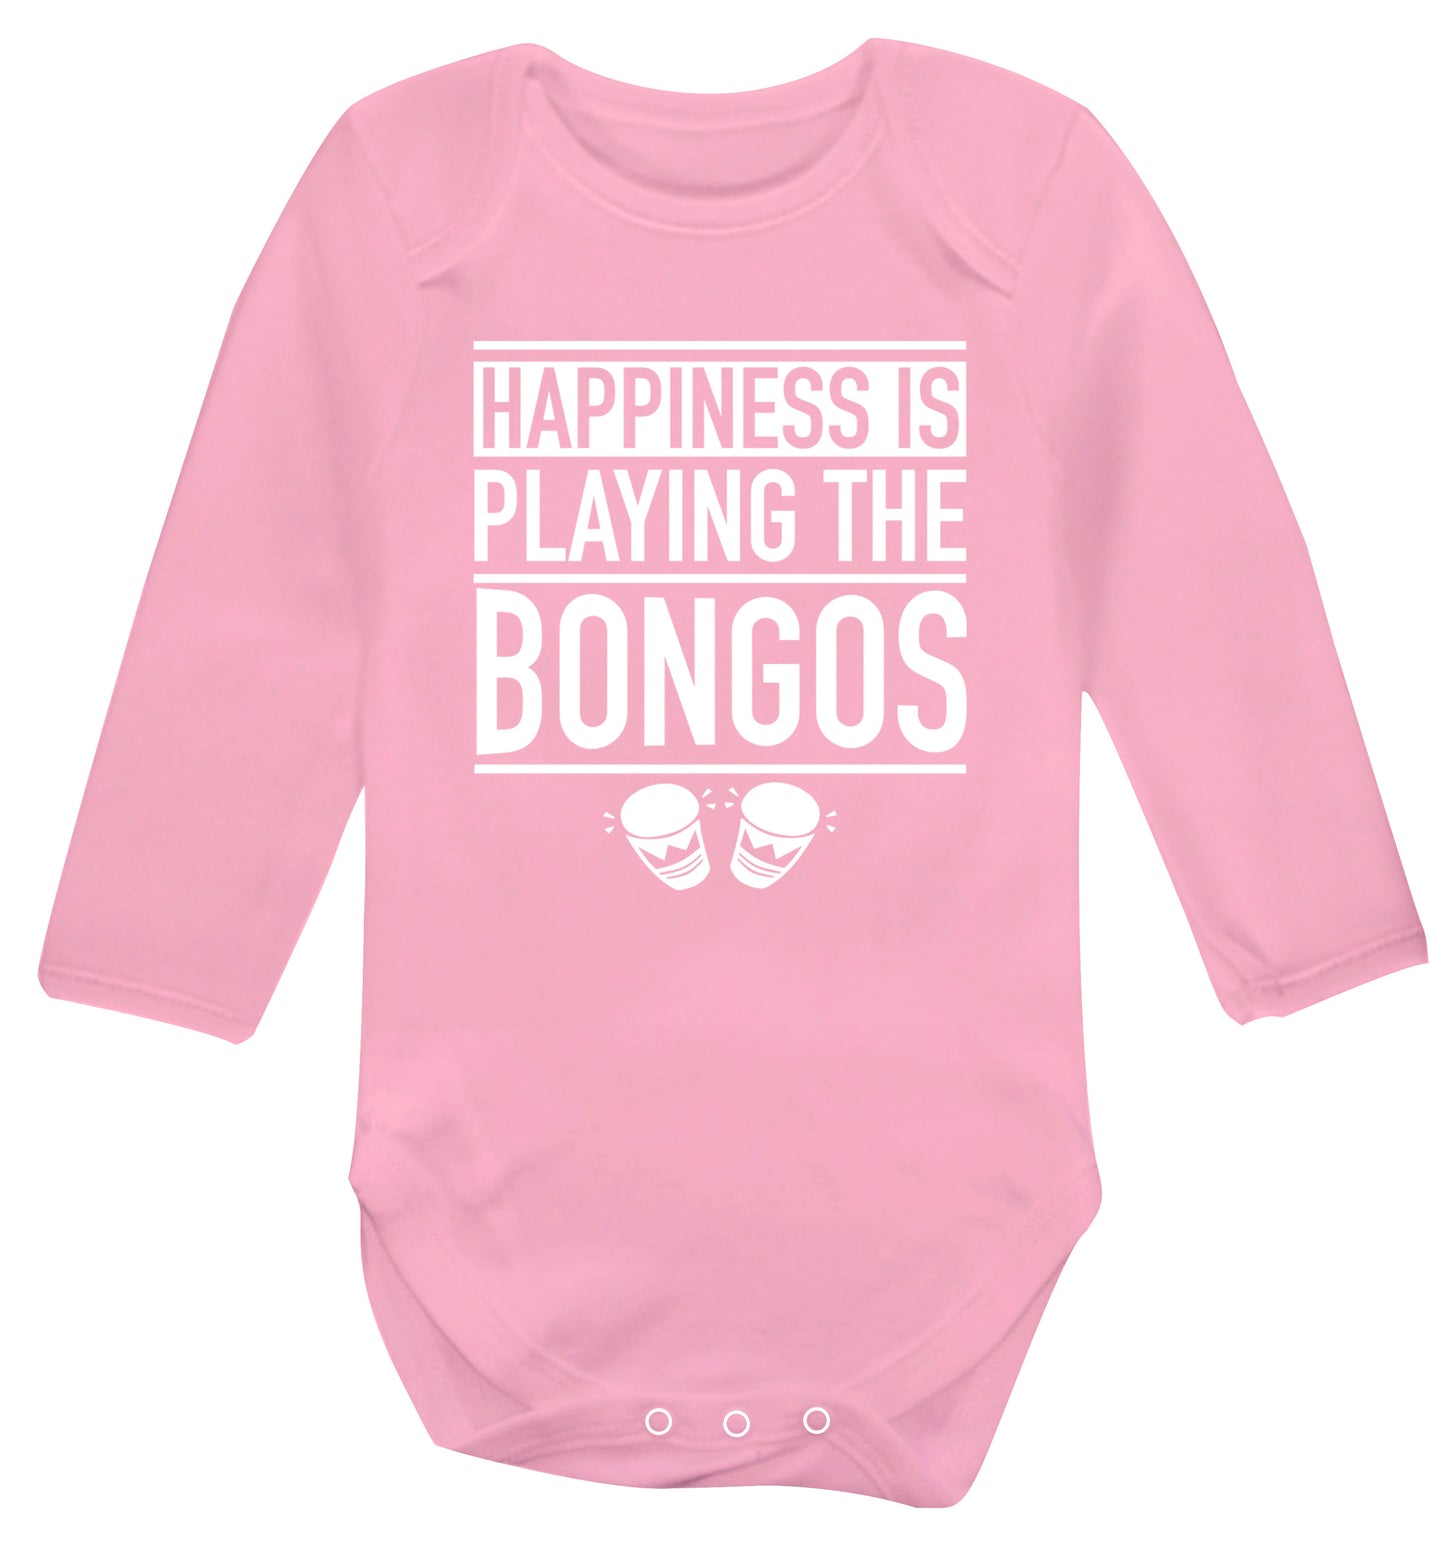 Happiness is playing the bongos Baby Vest long sleeved pale pink 6-12 months